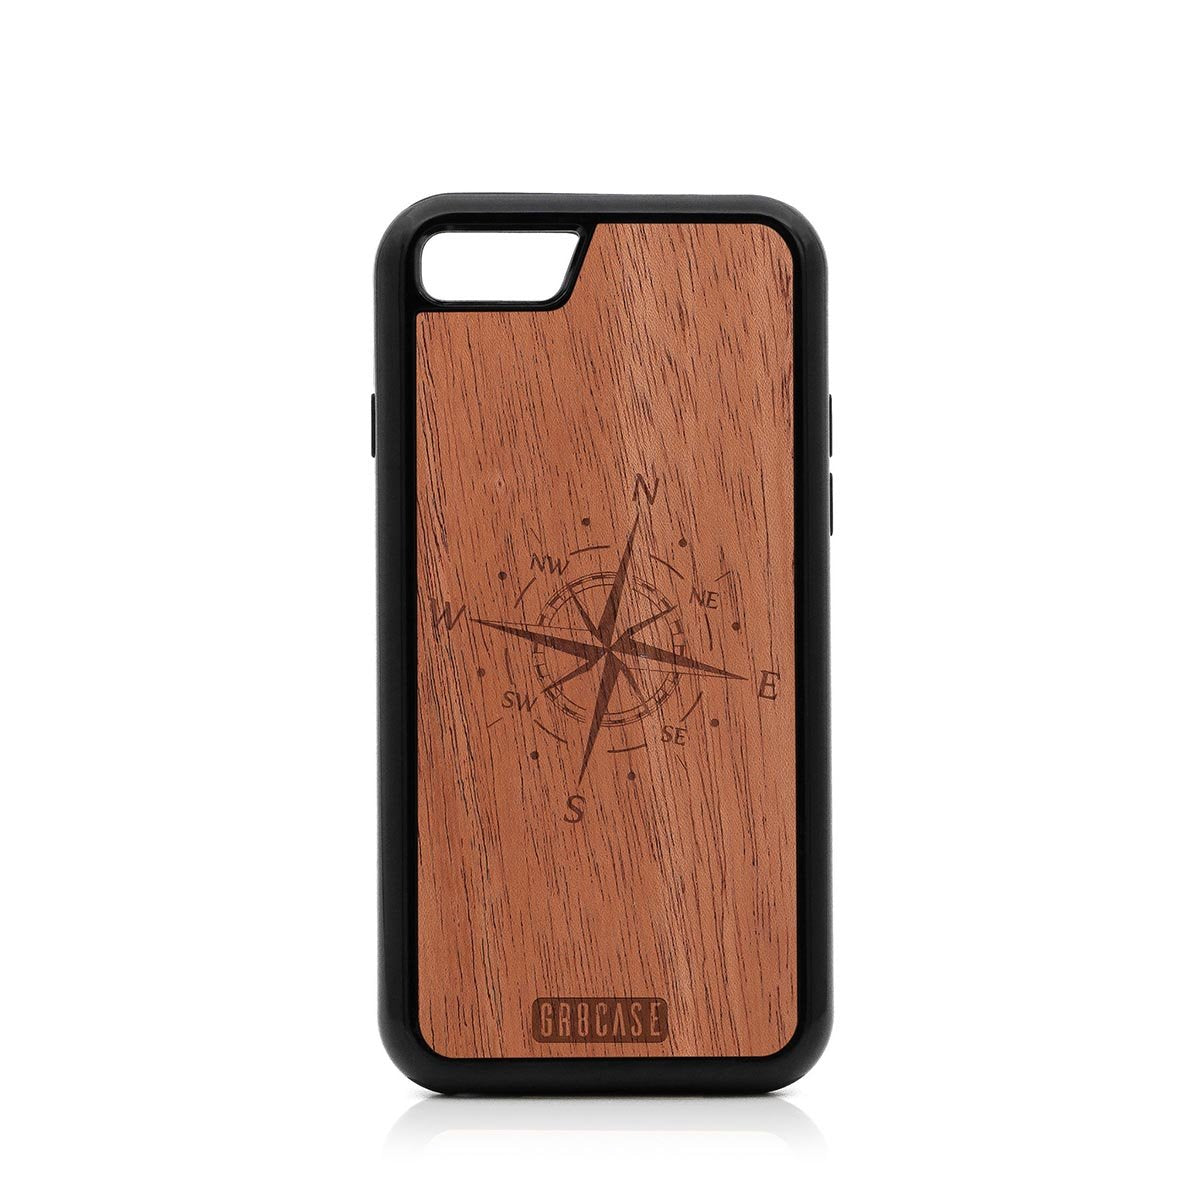 Compass Design Wood Case For iPhone SE 2020 by GR8CASE